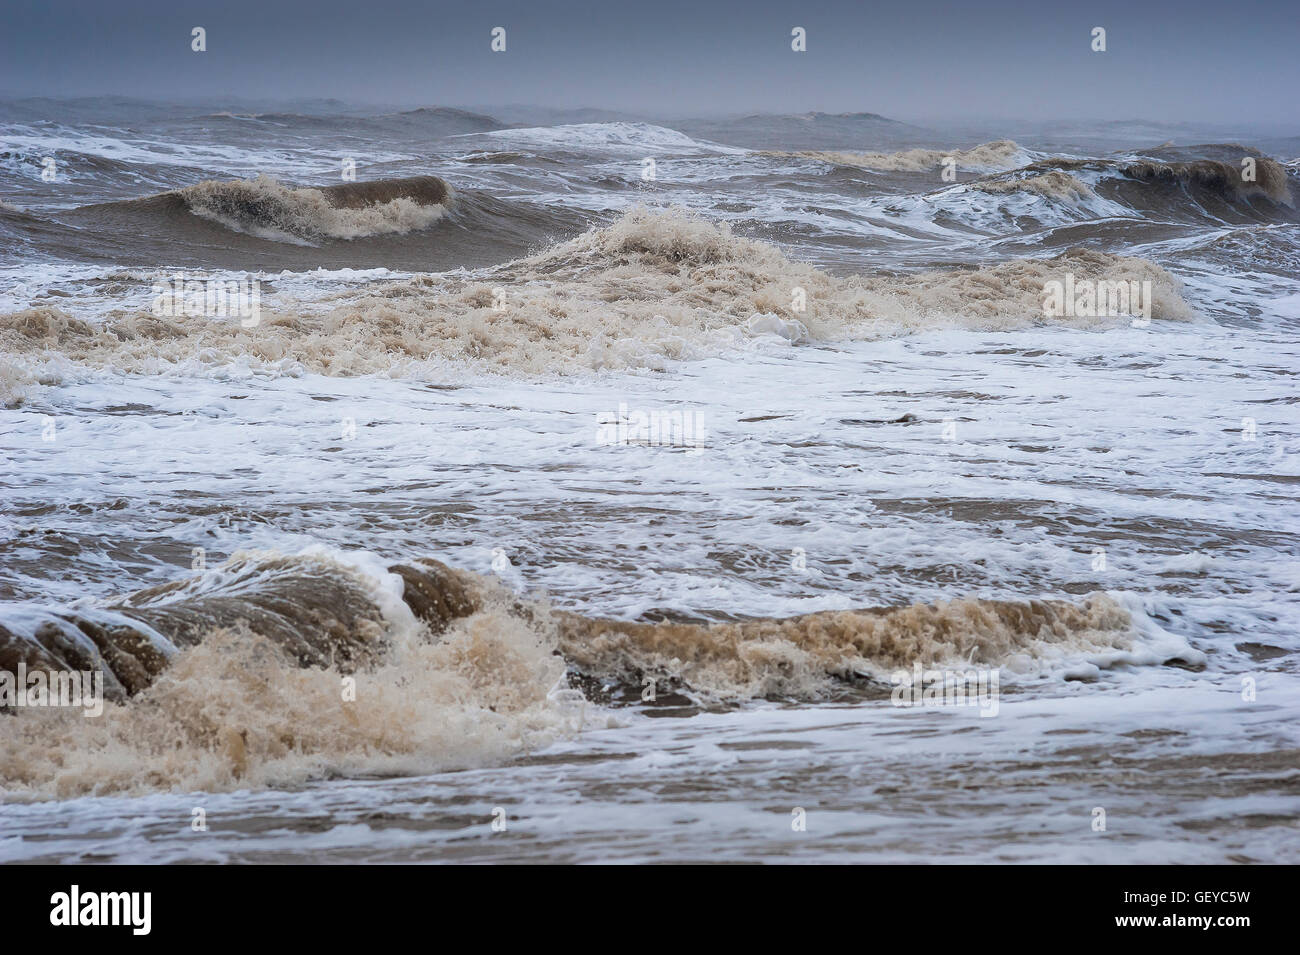 Beach stormy sea, view of a stormy North Sea breaking waves against the Suffolk coast at Thorpeness, England. Stock Photo